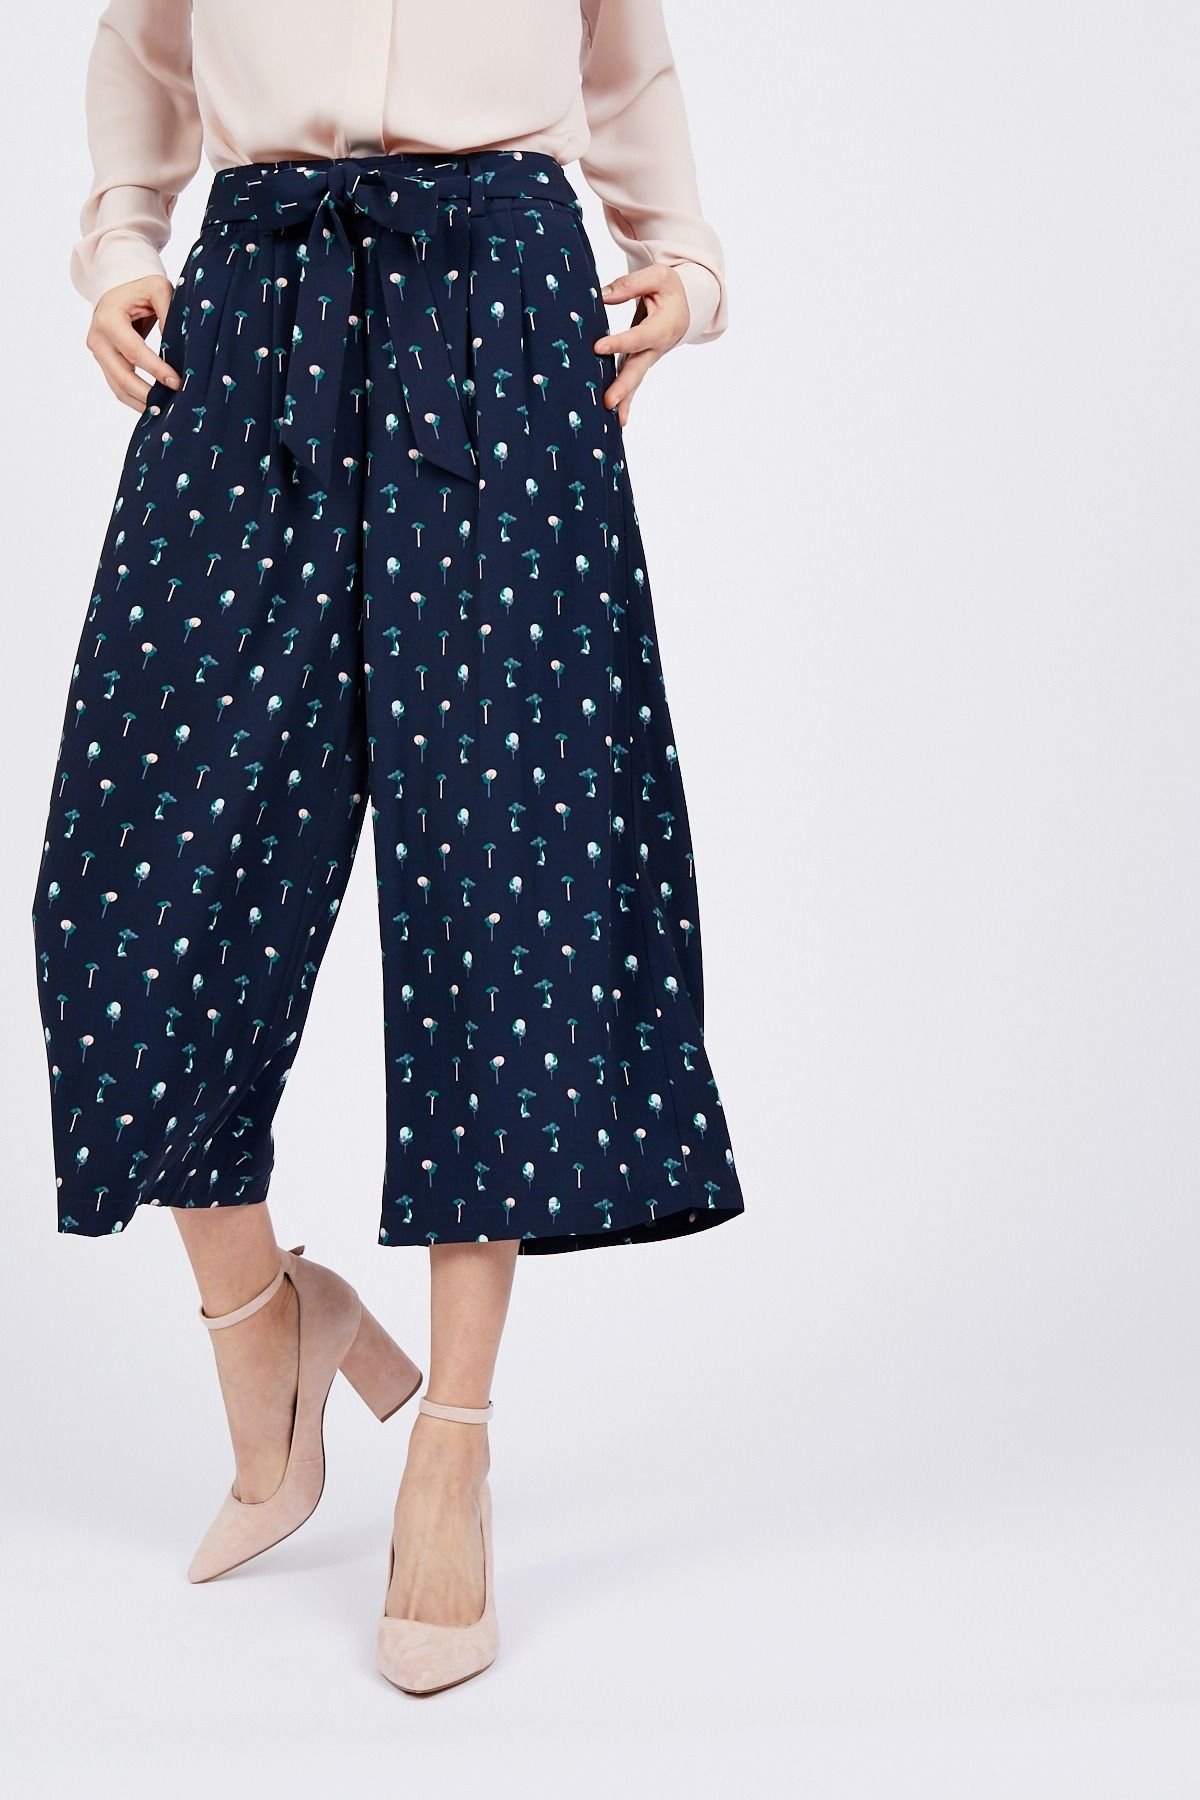 Palm Print Culottes by Ava - Rent Clothes with Le Tote | Le Tote